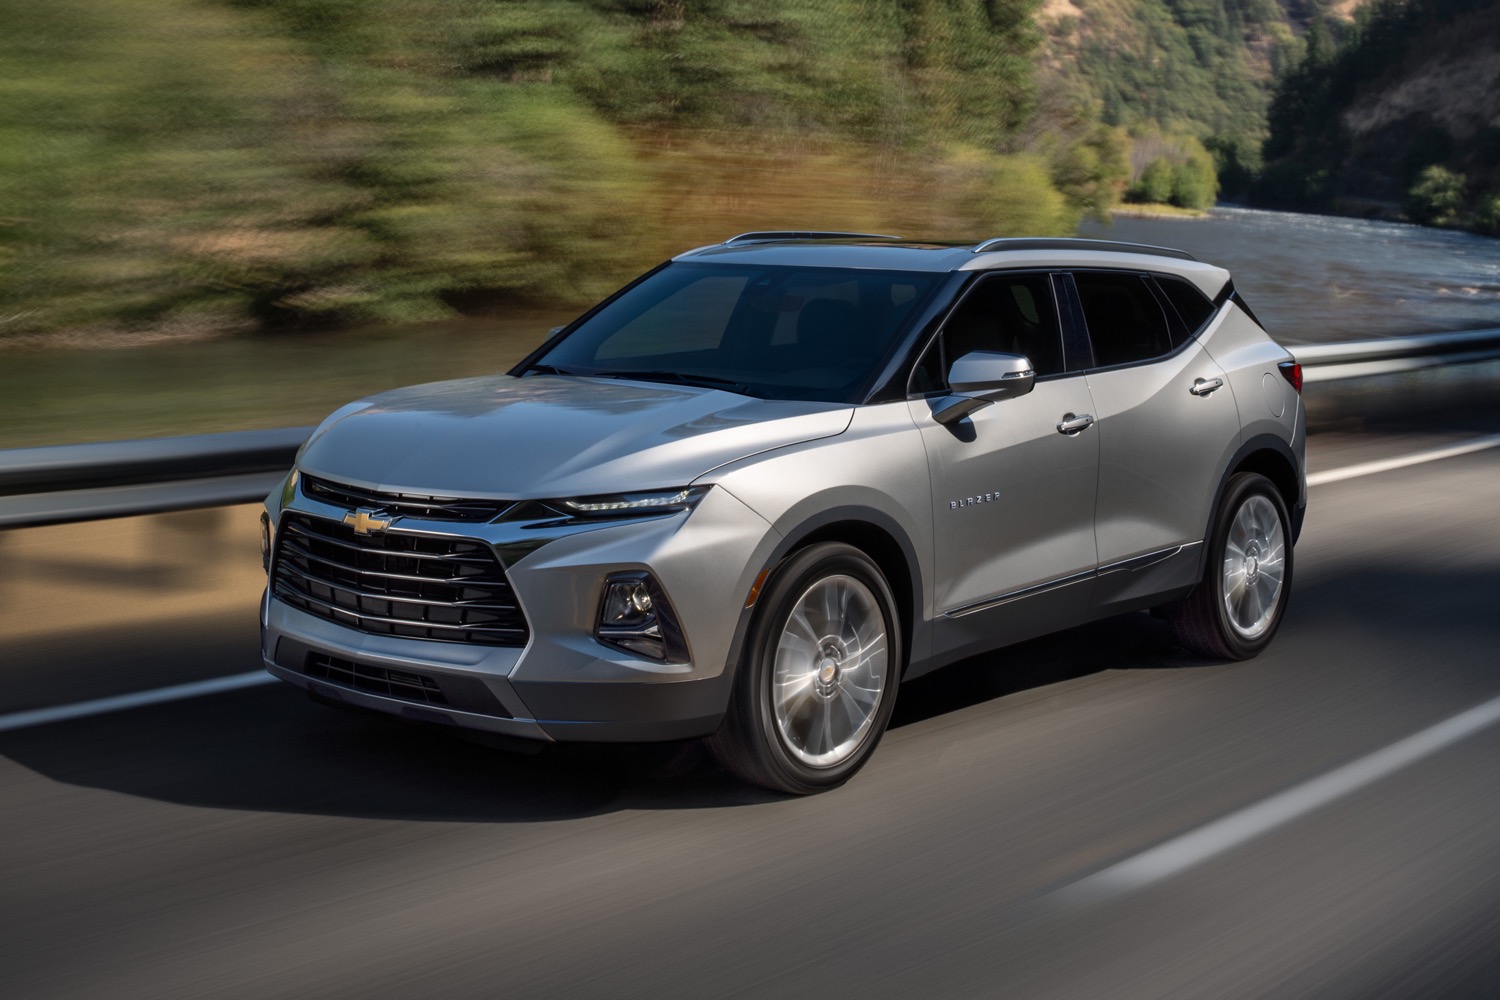 Chevy Blazer Sales Place MidPack During Q4 2021